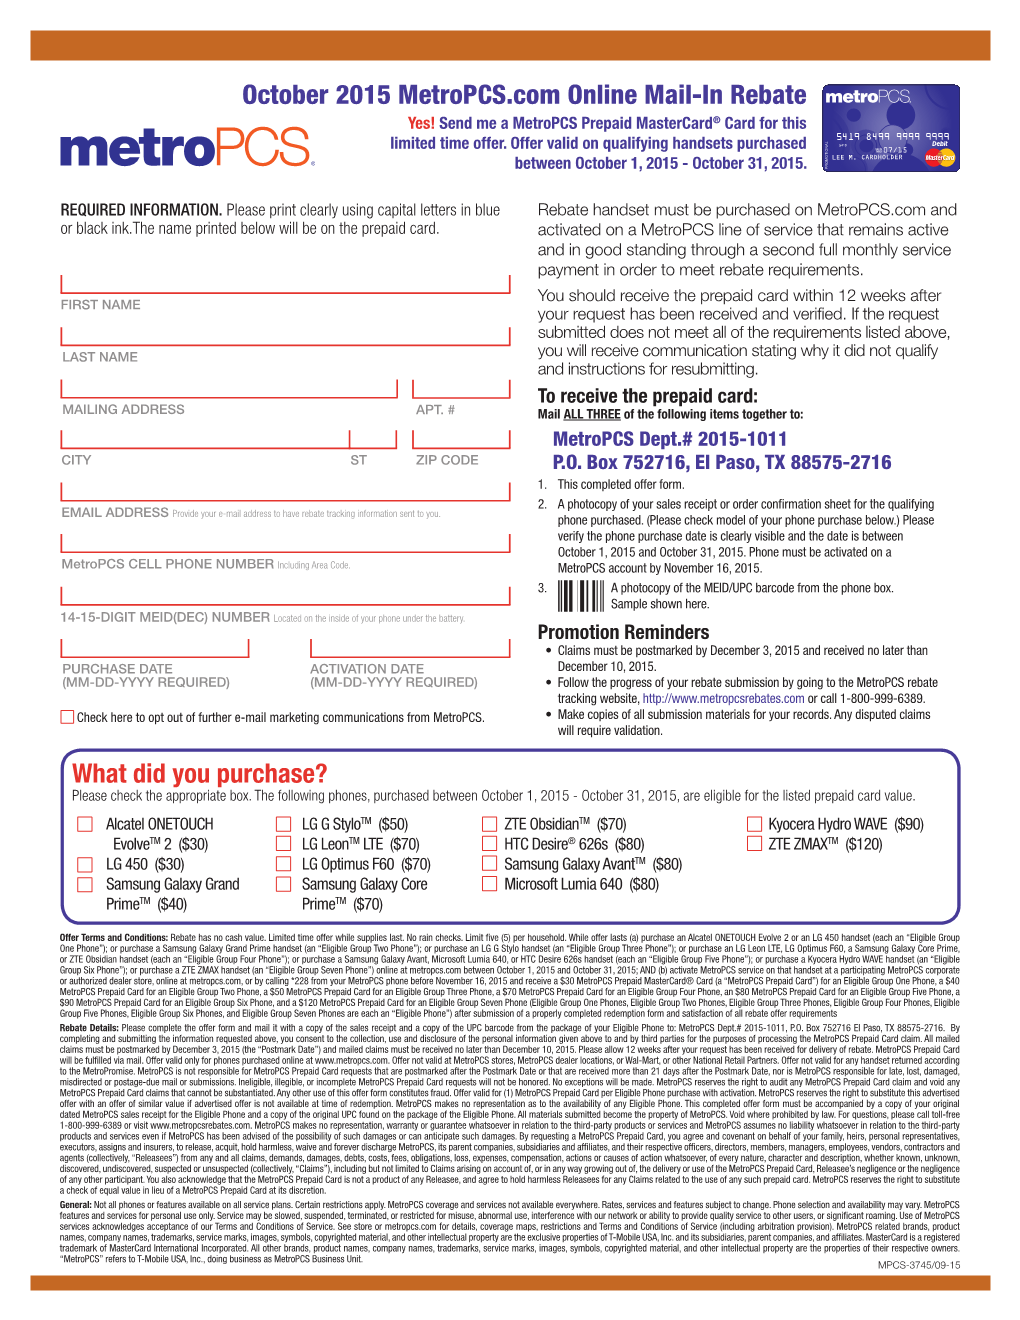 October 2015 Metropcs.Com Online Mail-In Rebate Yes! Send Me a Metropcs Prepaid Mastercard® Card for This Limited Time Offer